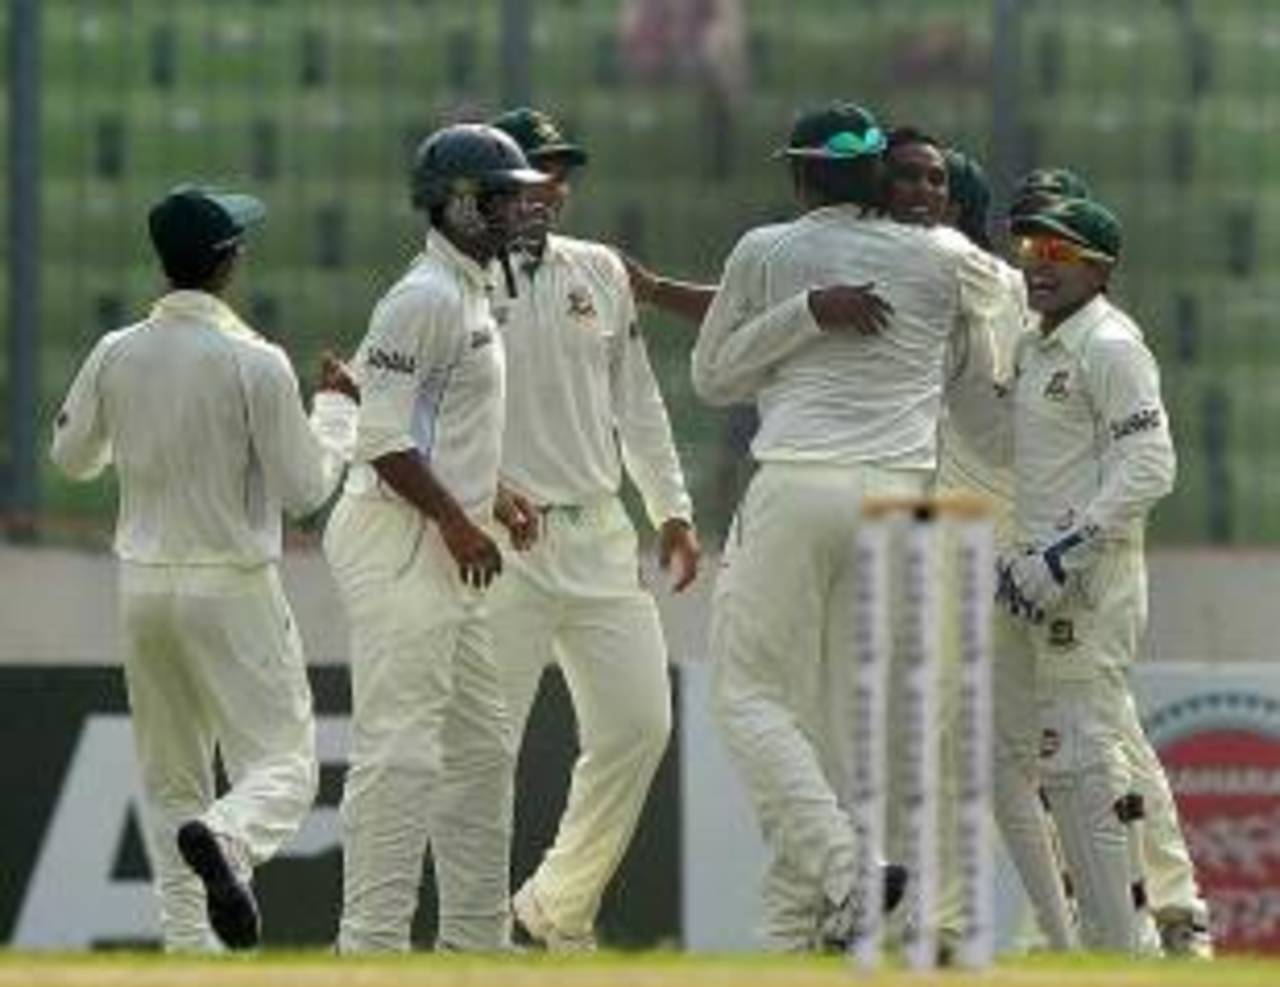 Sohag Gazi picked up two wickets in the morning session, Bangladesh v West Indies, 1st Test, Mirpur, 1st day, November 13, 2012